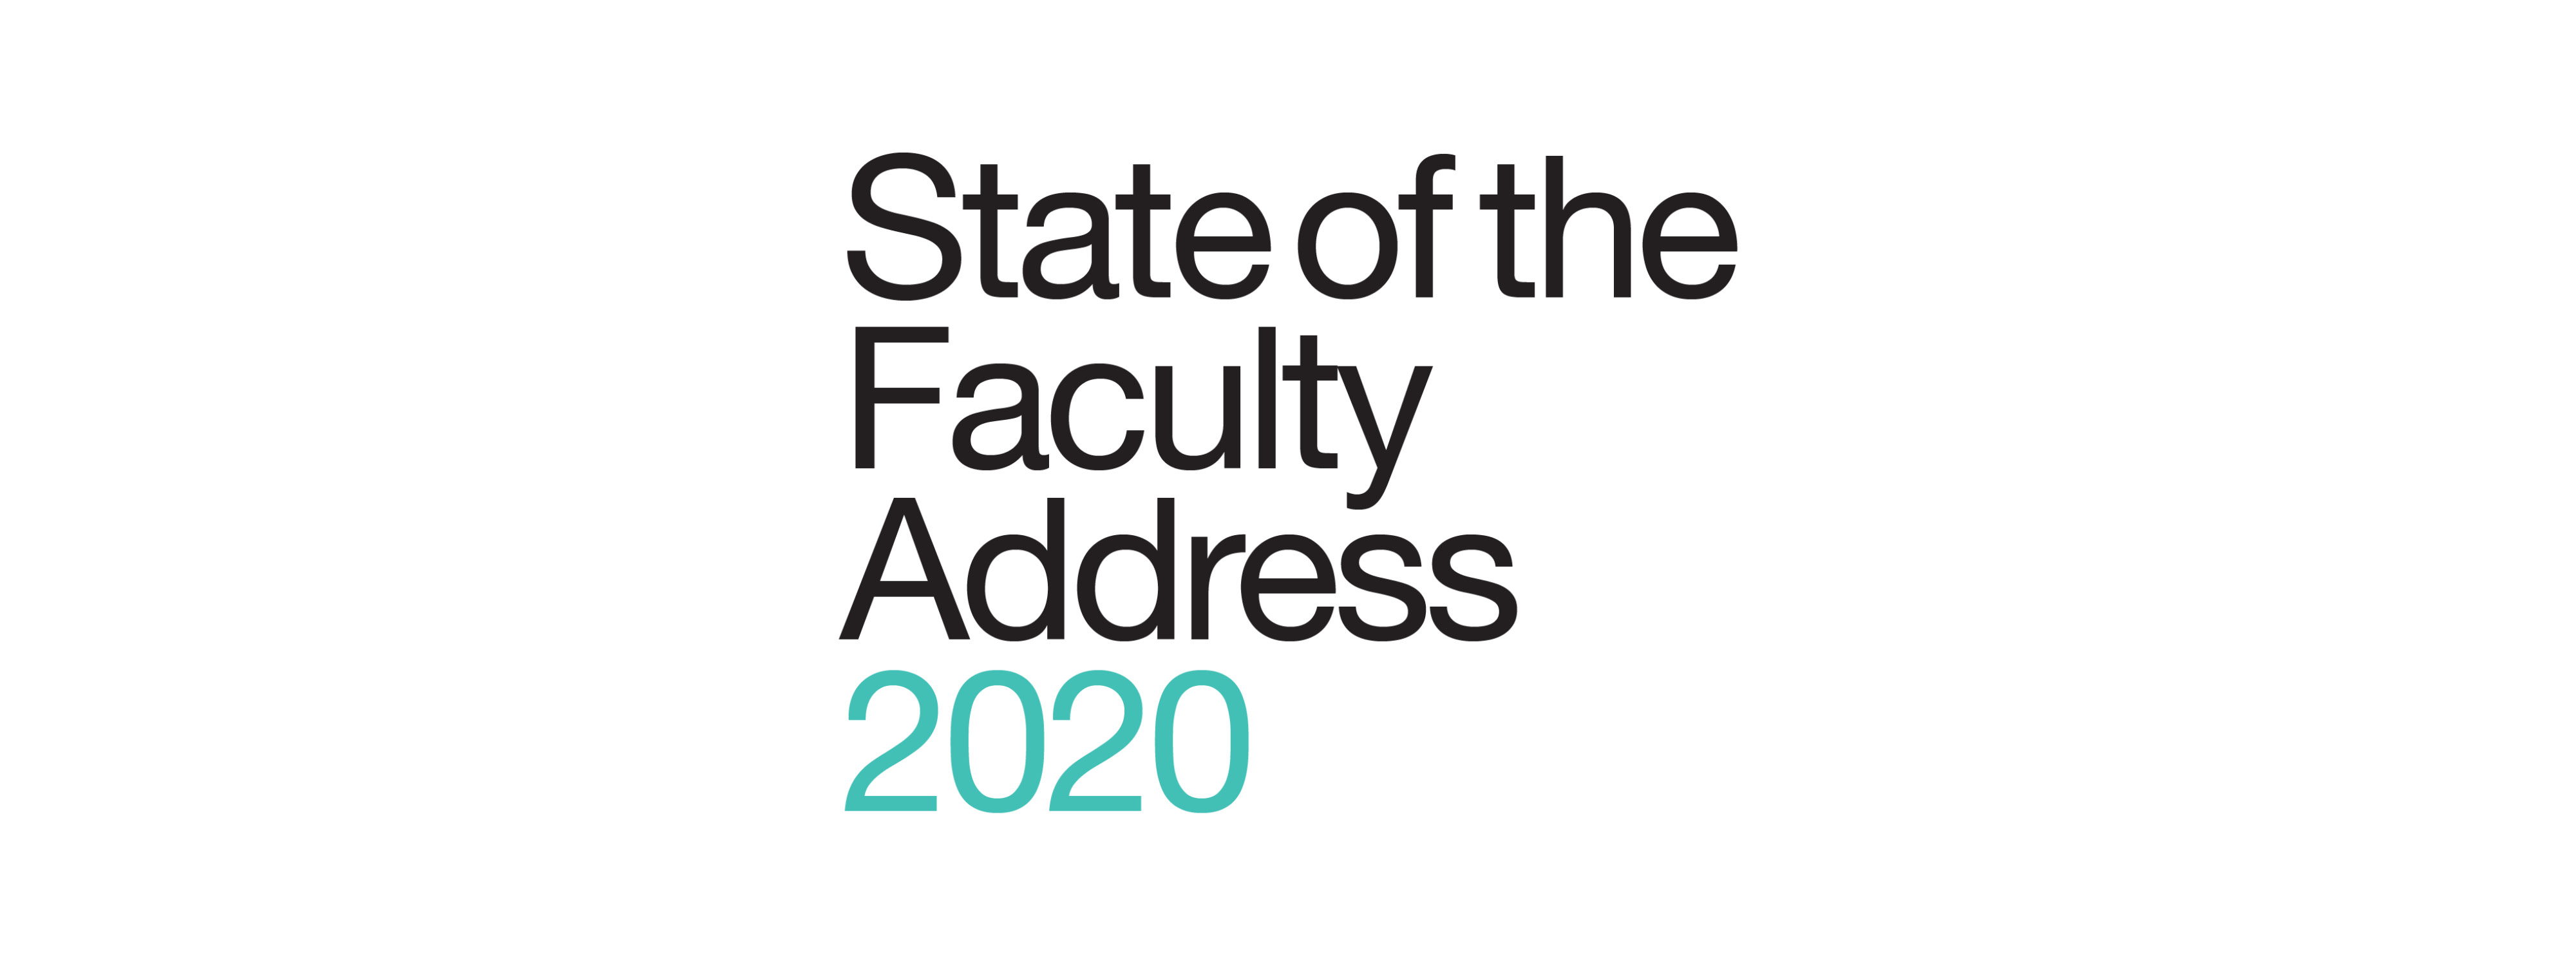 State of the Faculty Address 2020